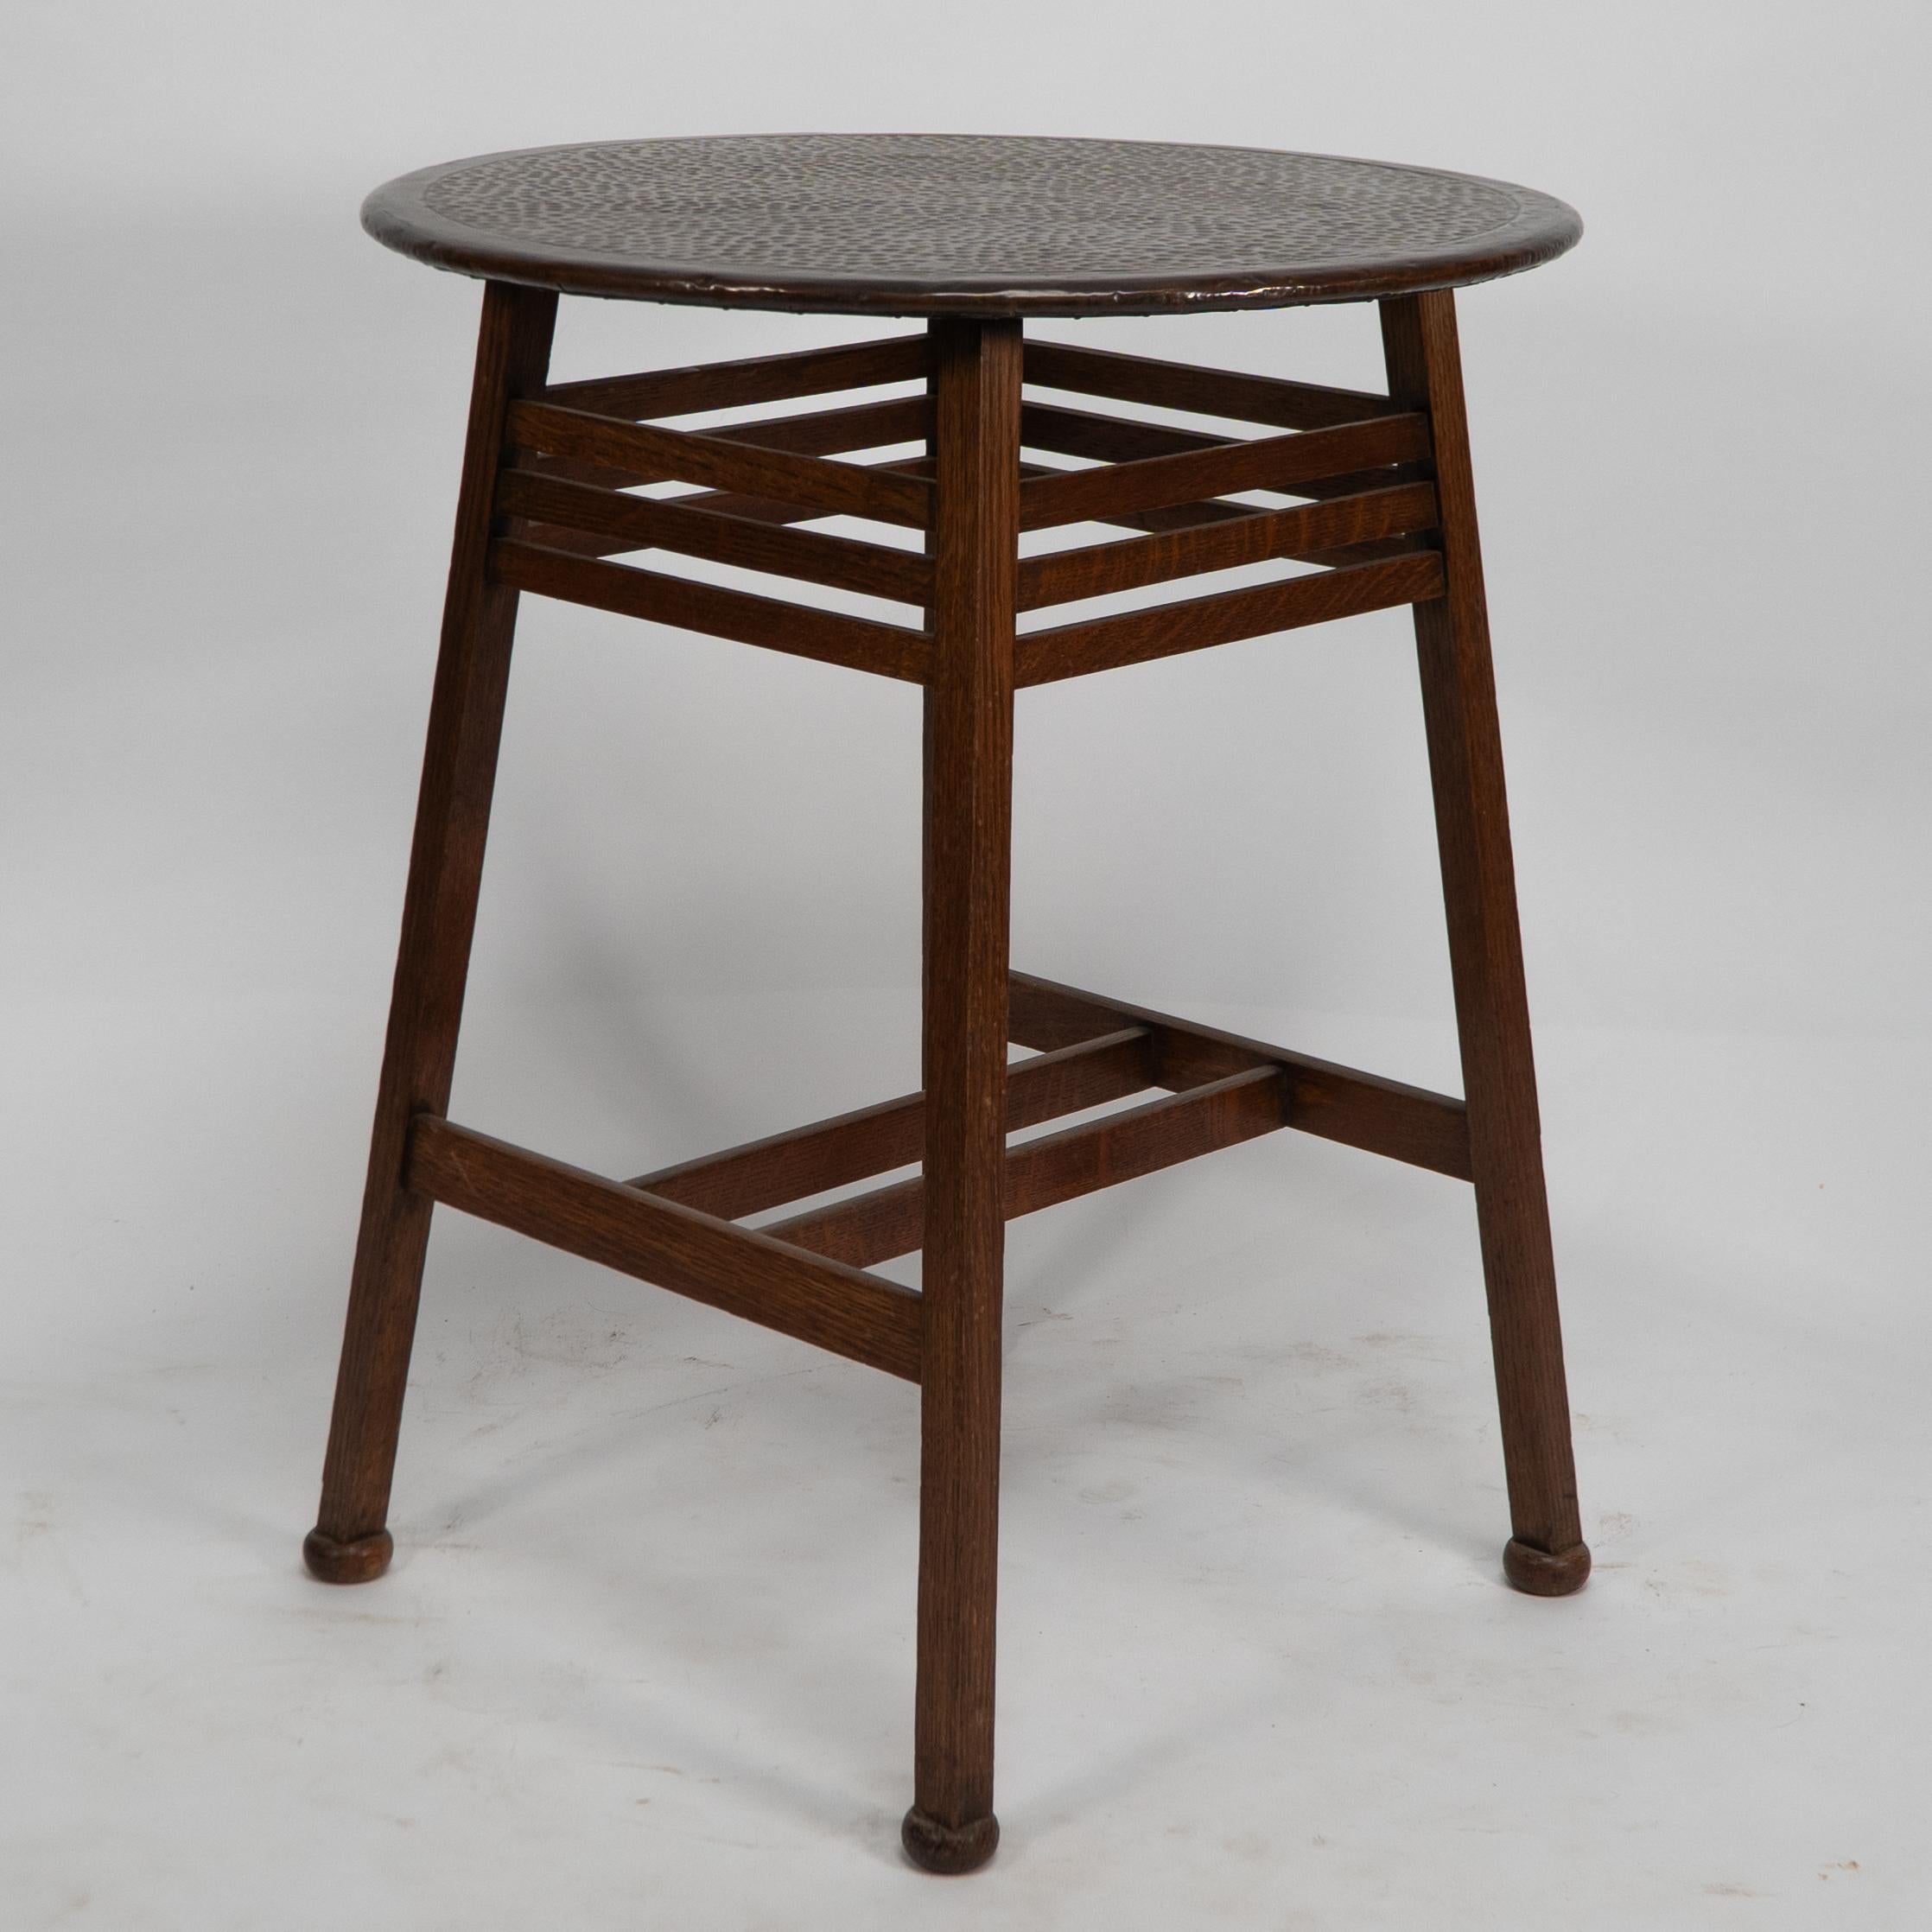 English Shapland and Petter. An oak Arts & Crafts side table with a hammered copper top. For Sale